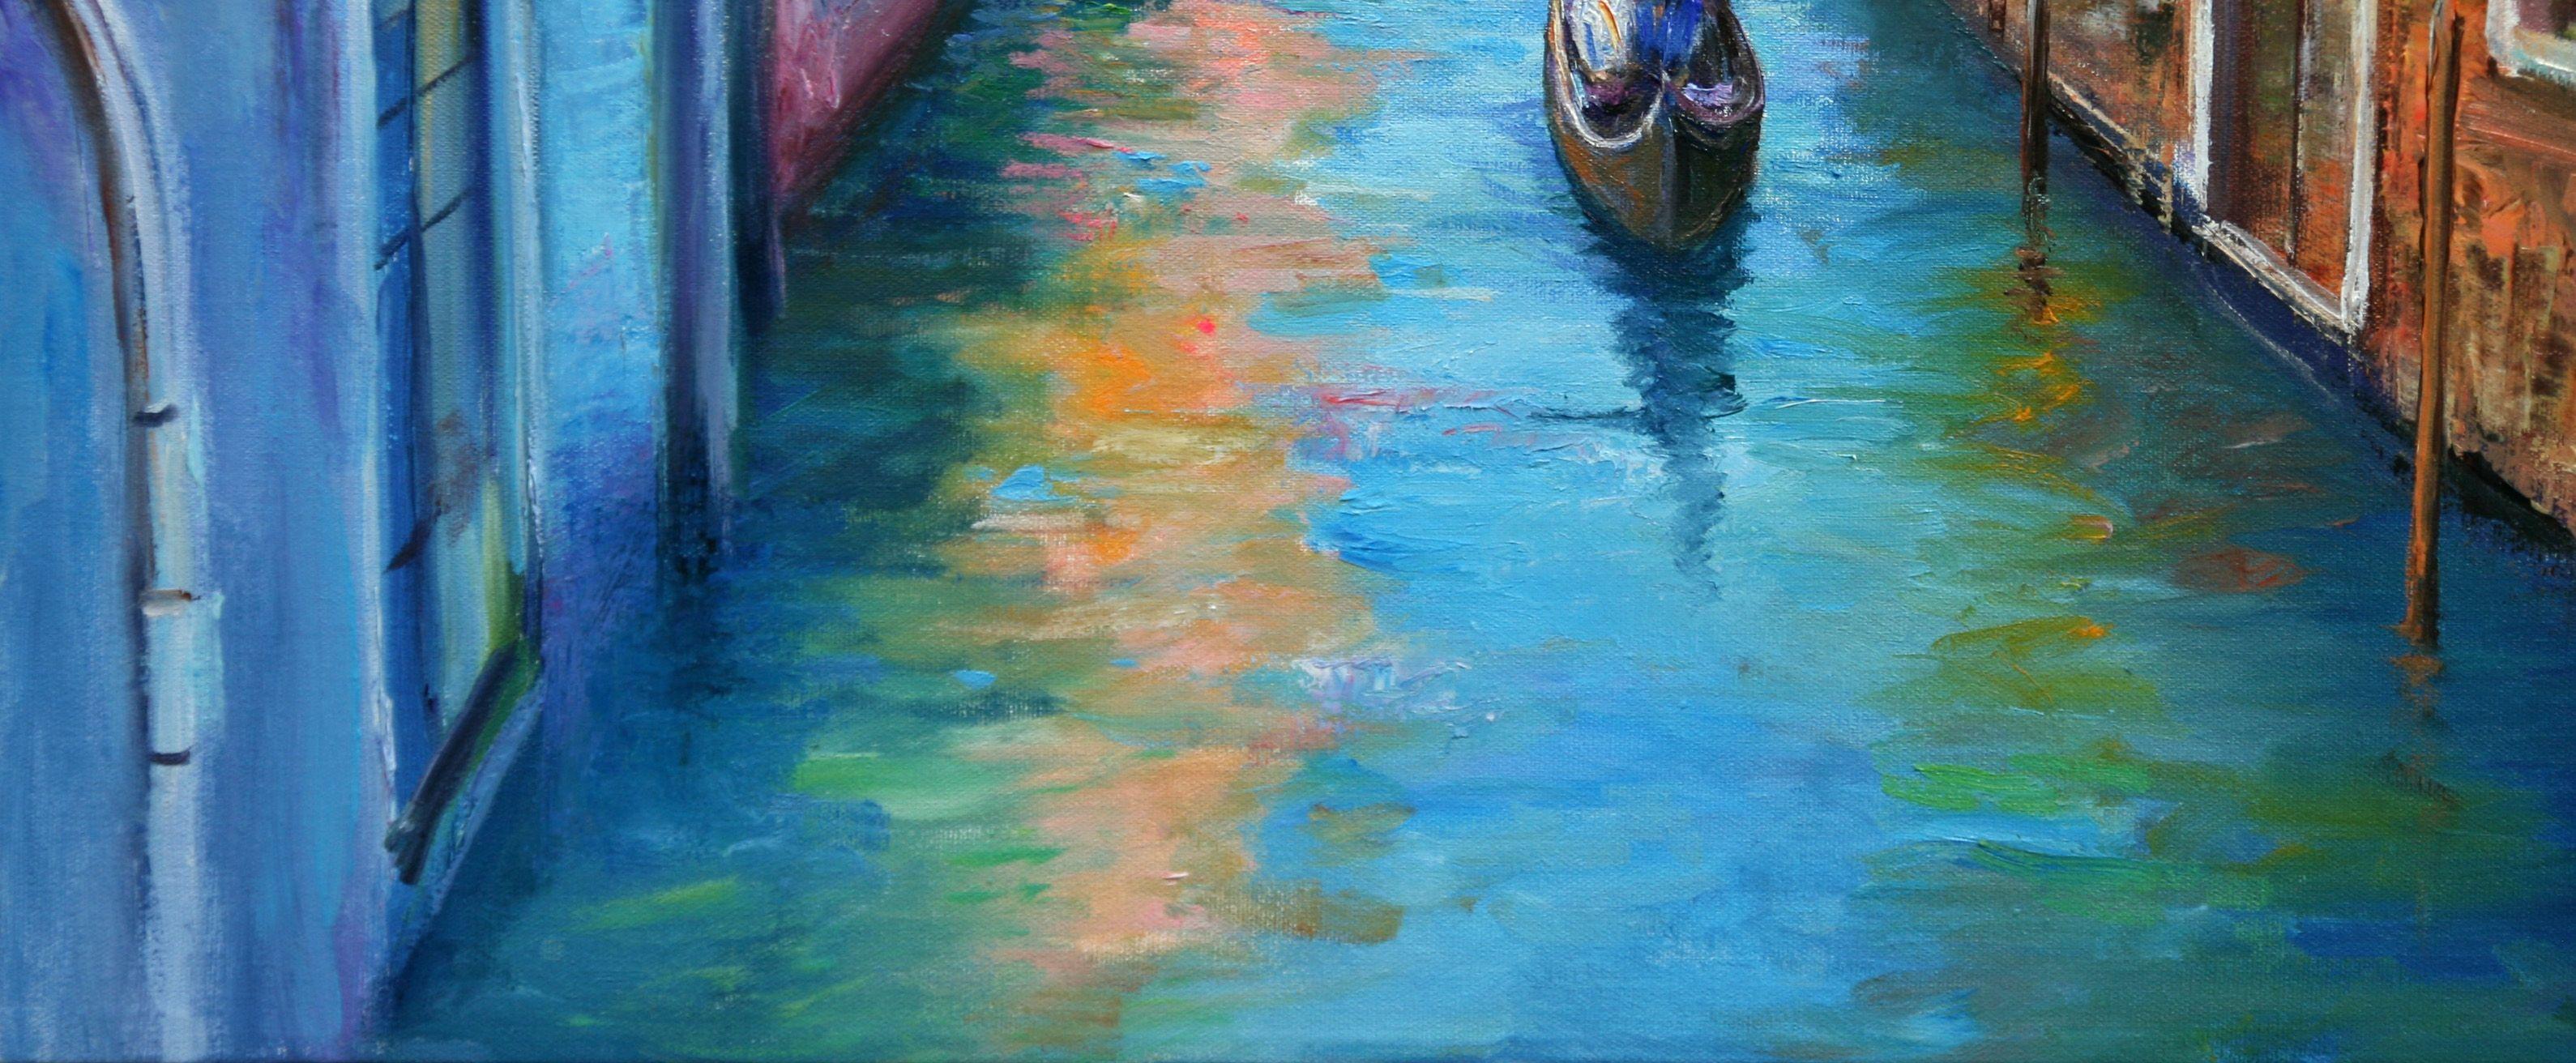 The Colors of Venice, Painting, Oil on Canvas 2